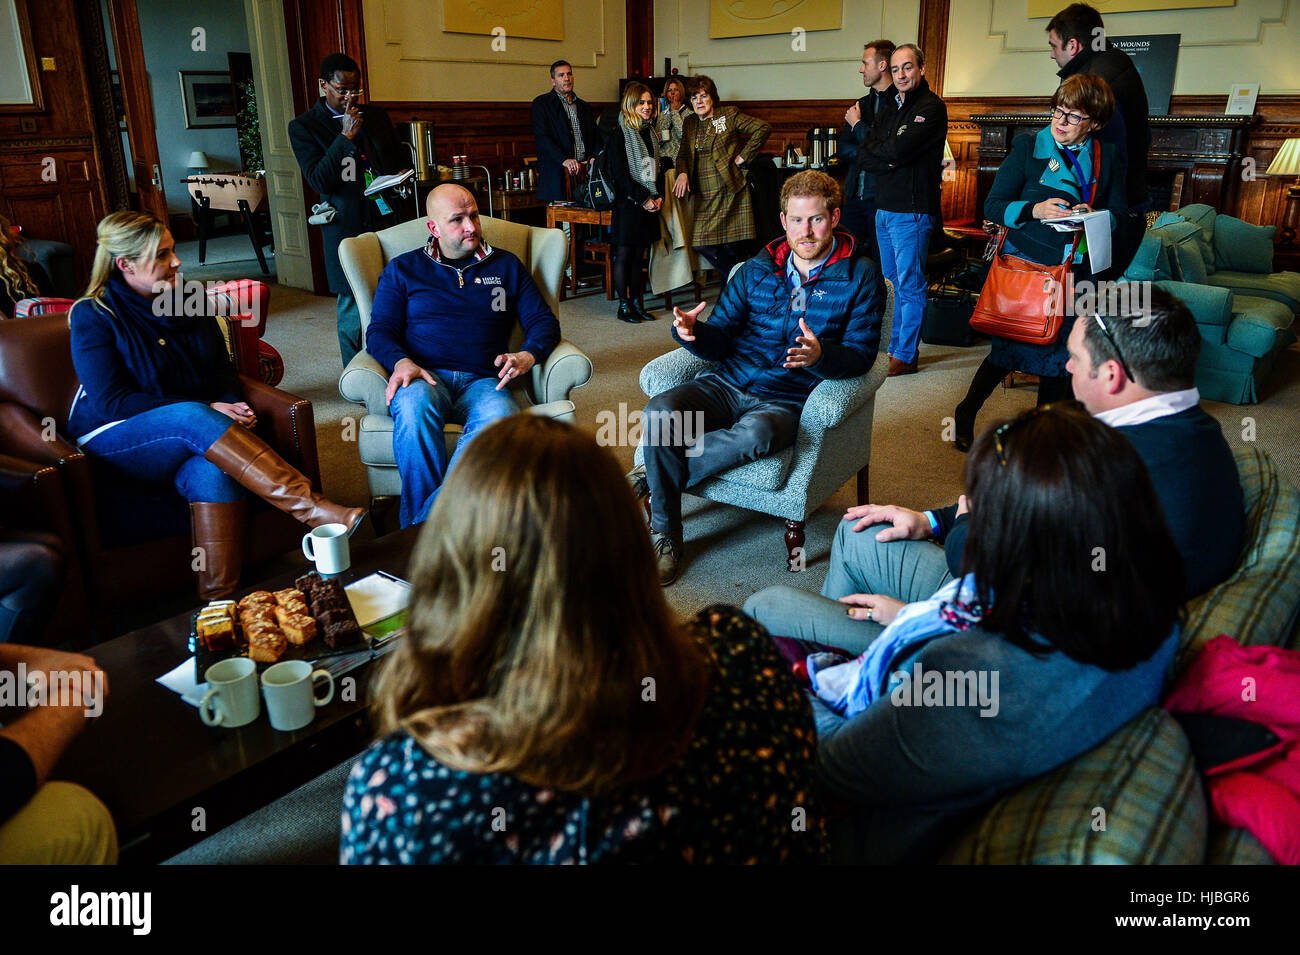 Prince Harry speaks with members of fellowship groups during a visit to a Help For Heroes Recovery Centre at Tedworth House in Tidworth, Wiltshire, where he learnt more about the mental health support military veterans are receiving. Stock Photo